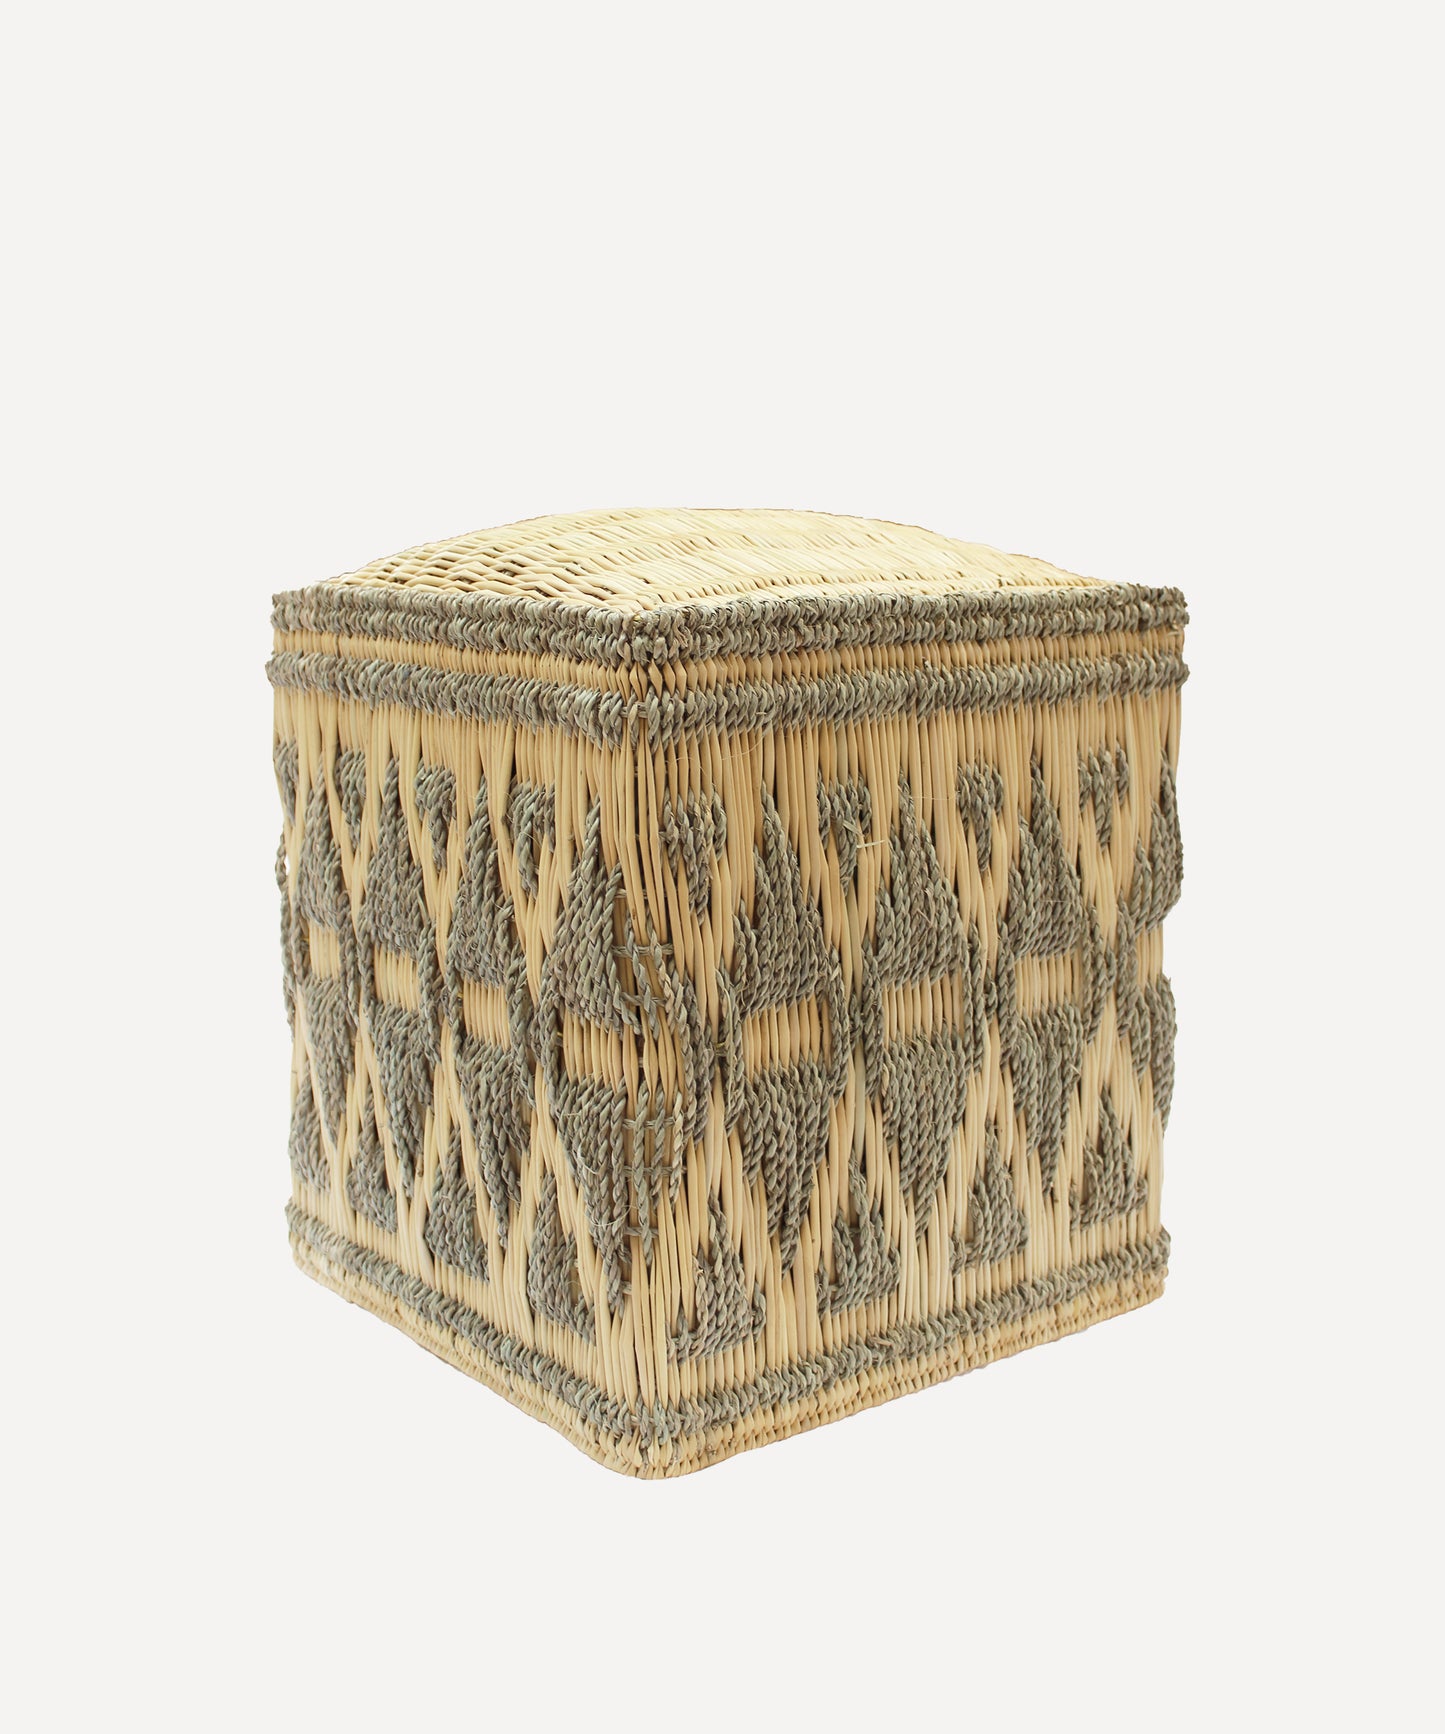 Fez Wicker Stool, Natural